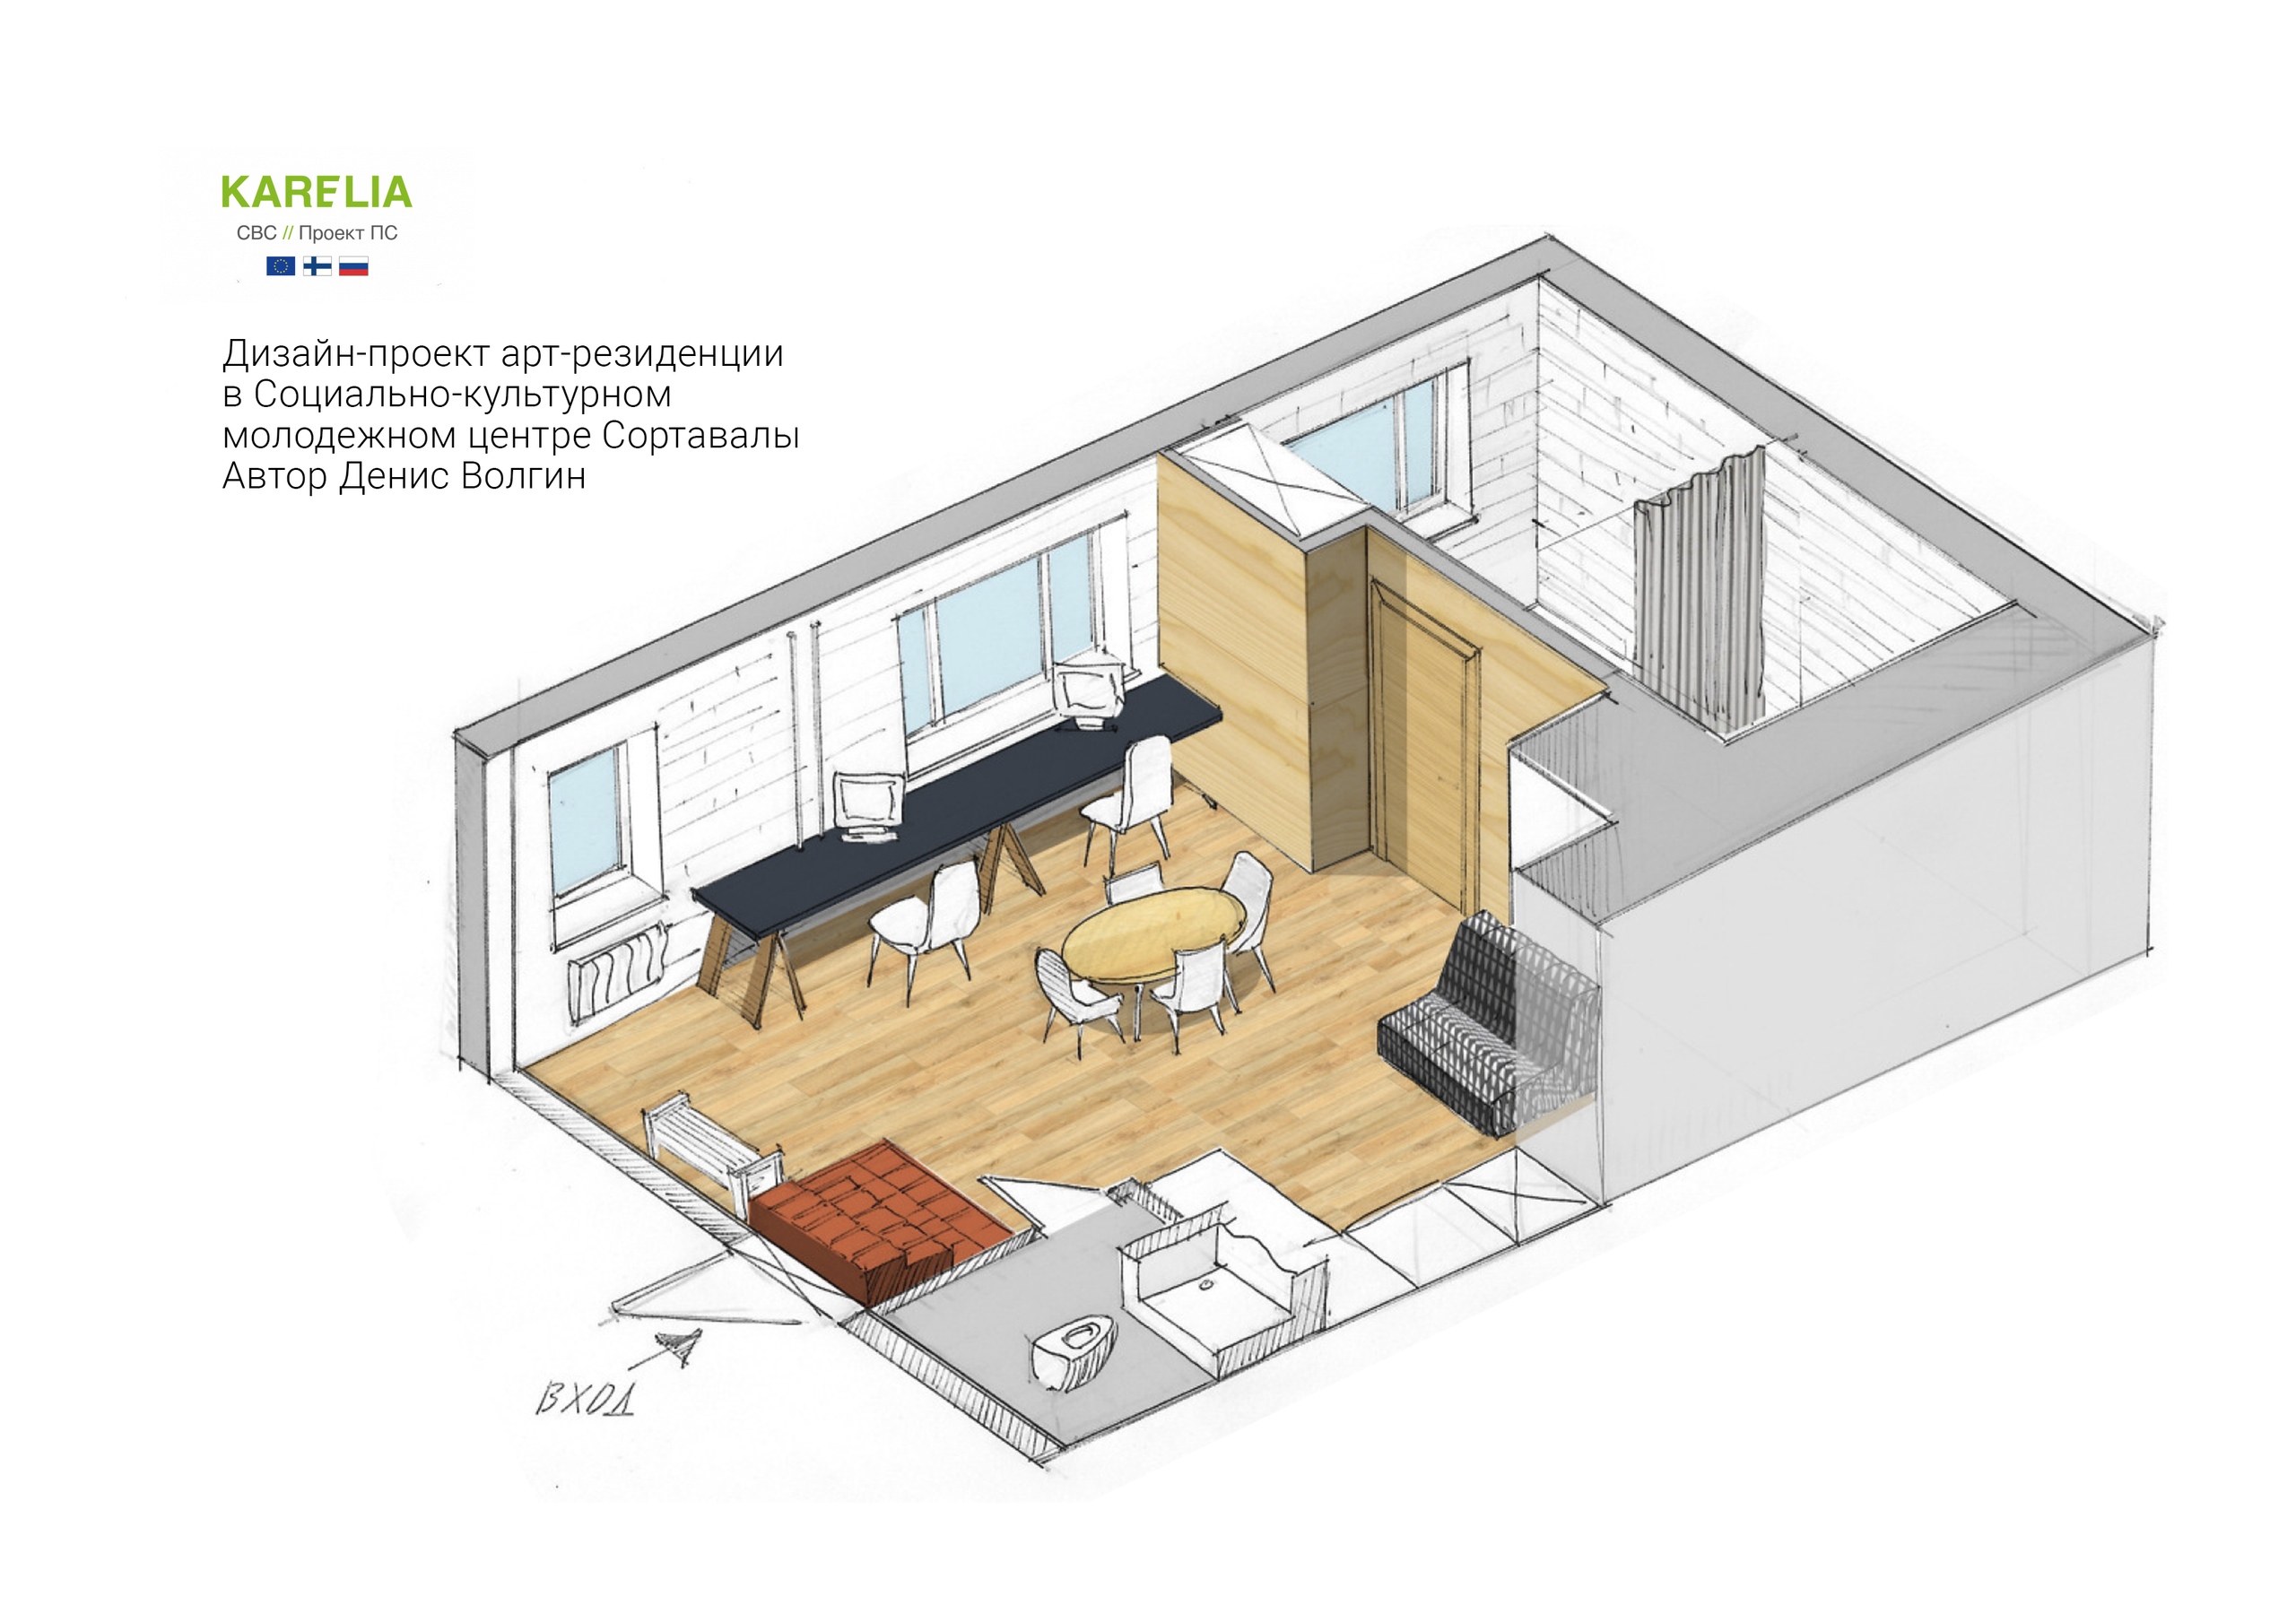 Design project for the Sortavala art residence